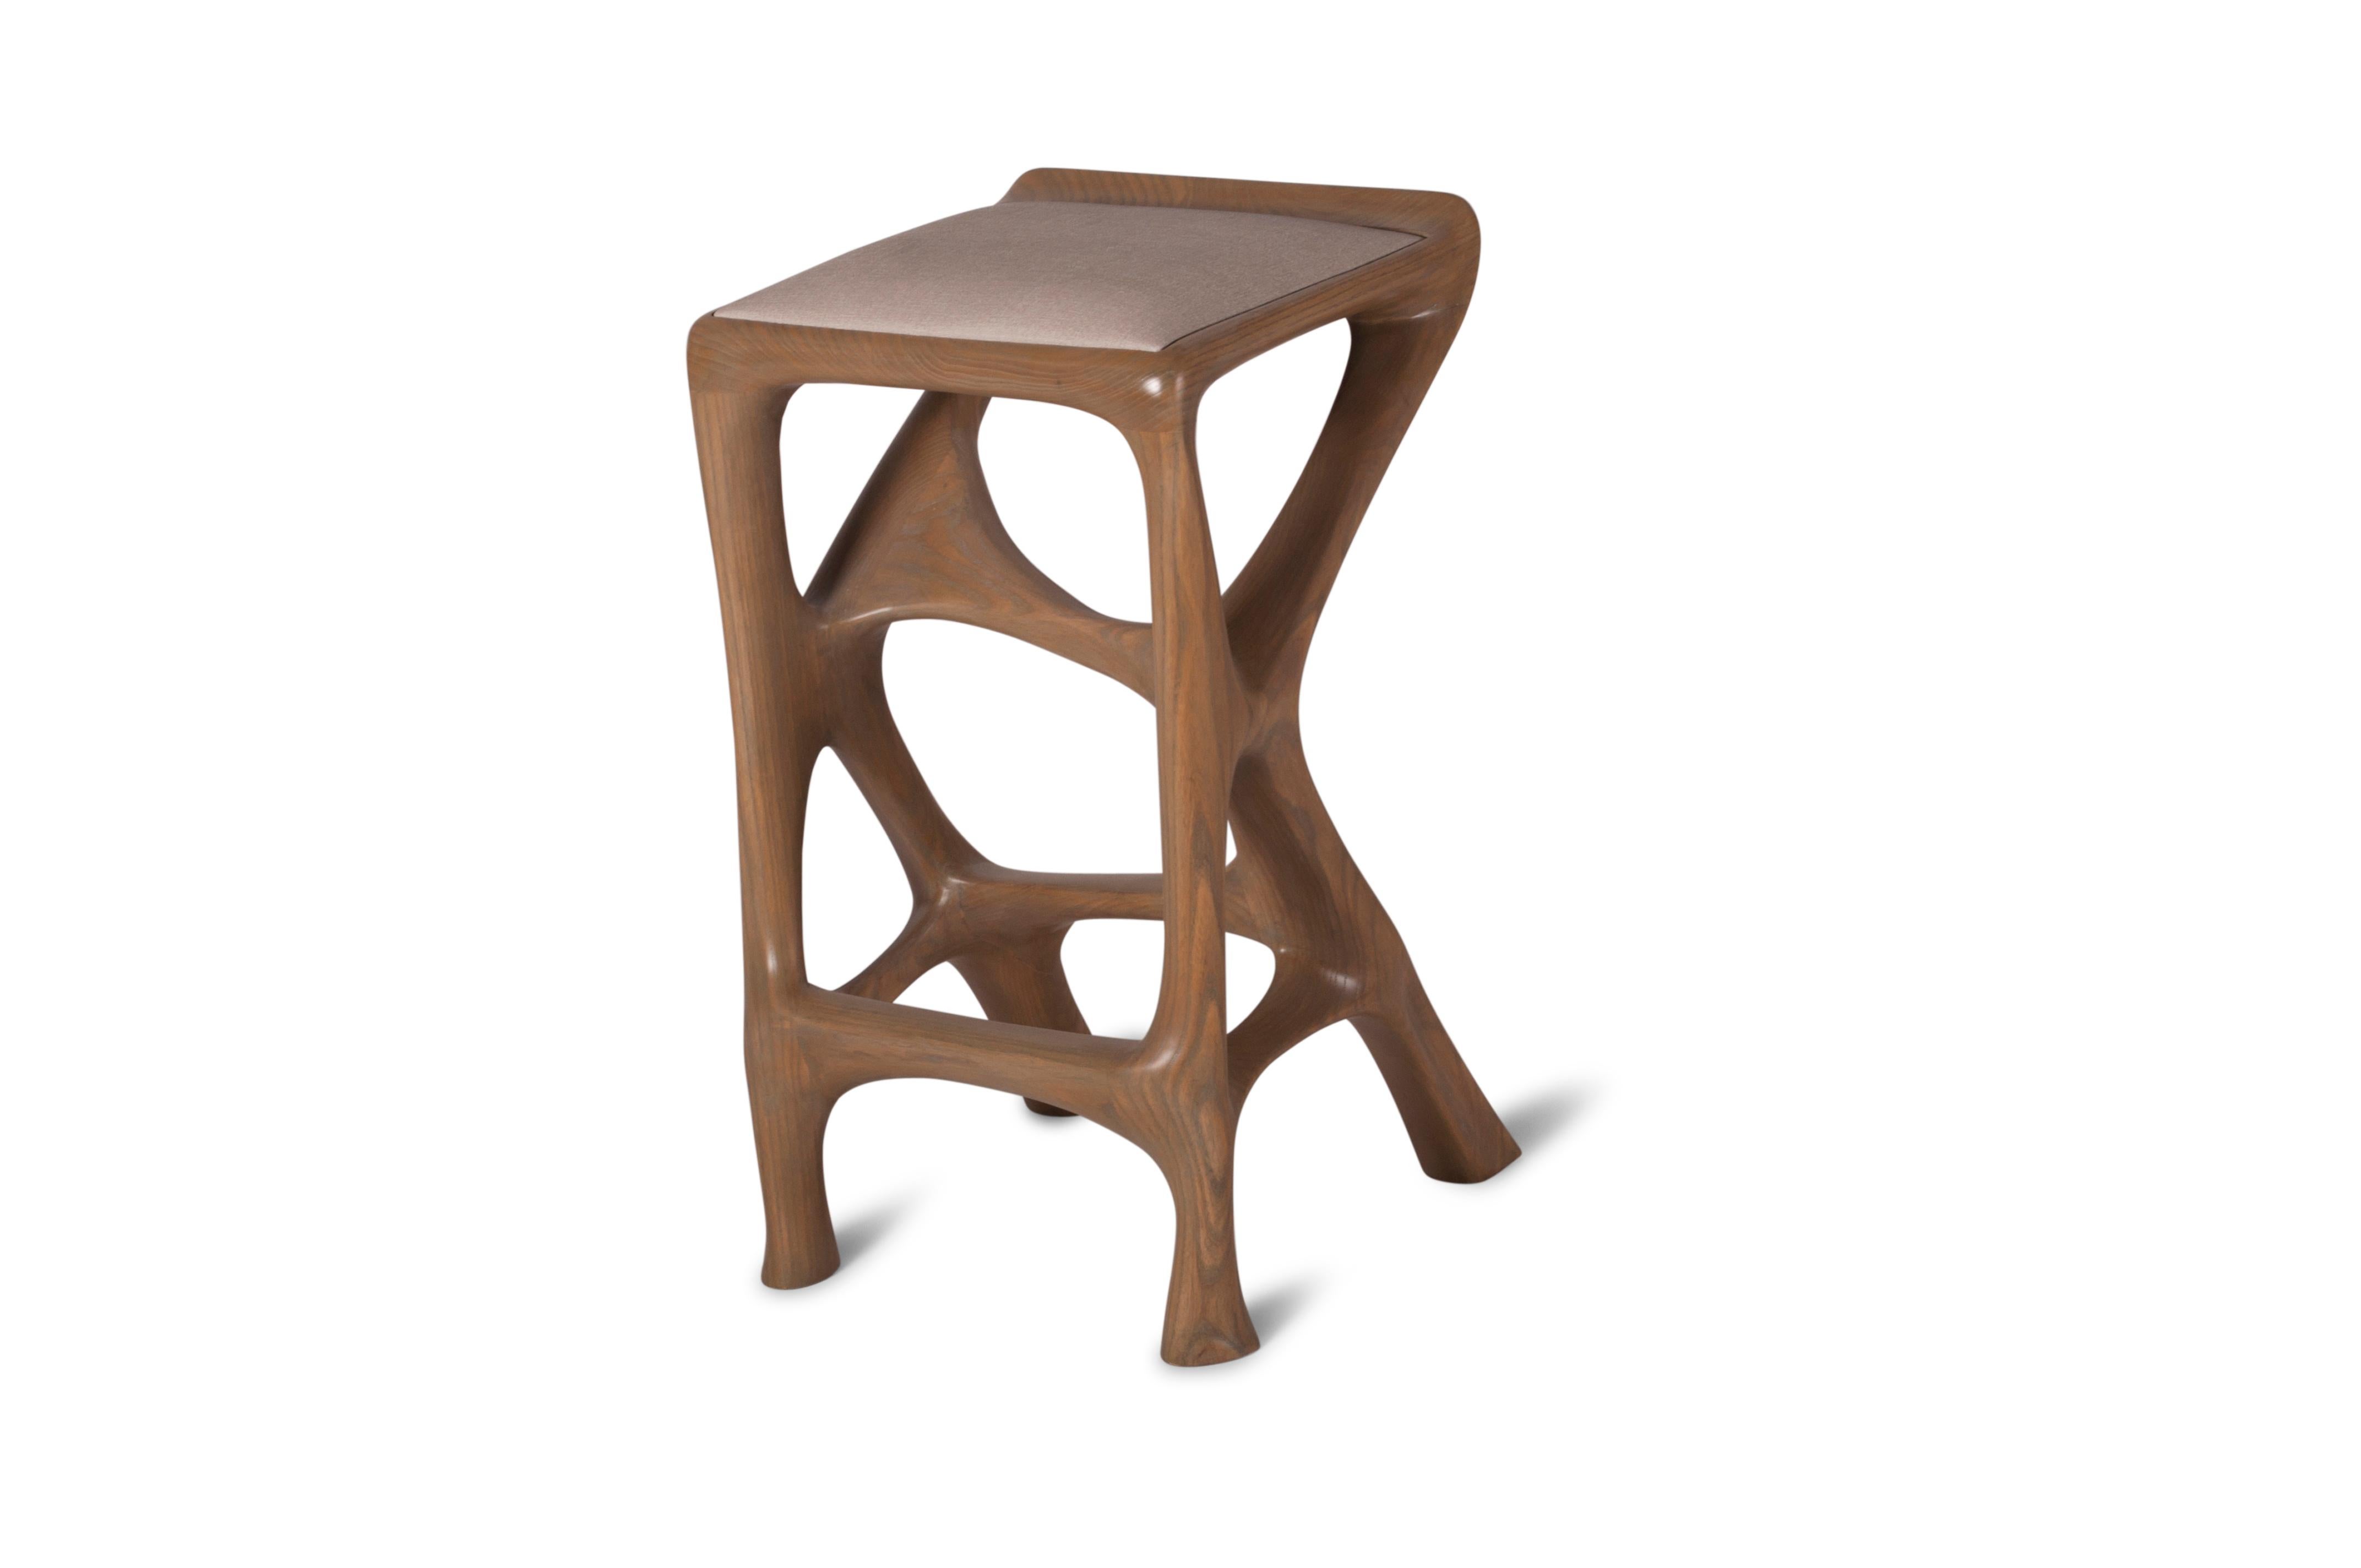 Barstool designed by Amorph made out of solid ashwood and leather. Stain color: Rusted walnut
Dimension: 31